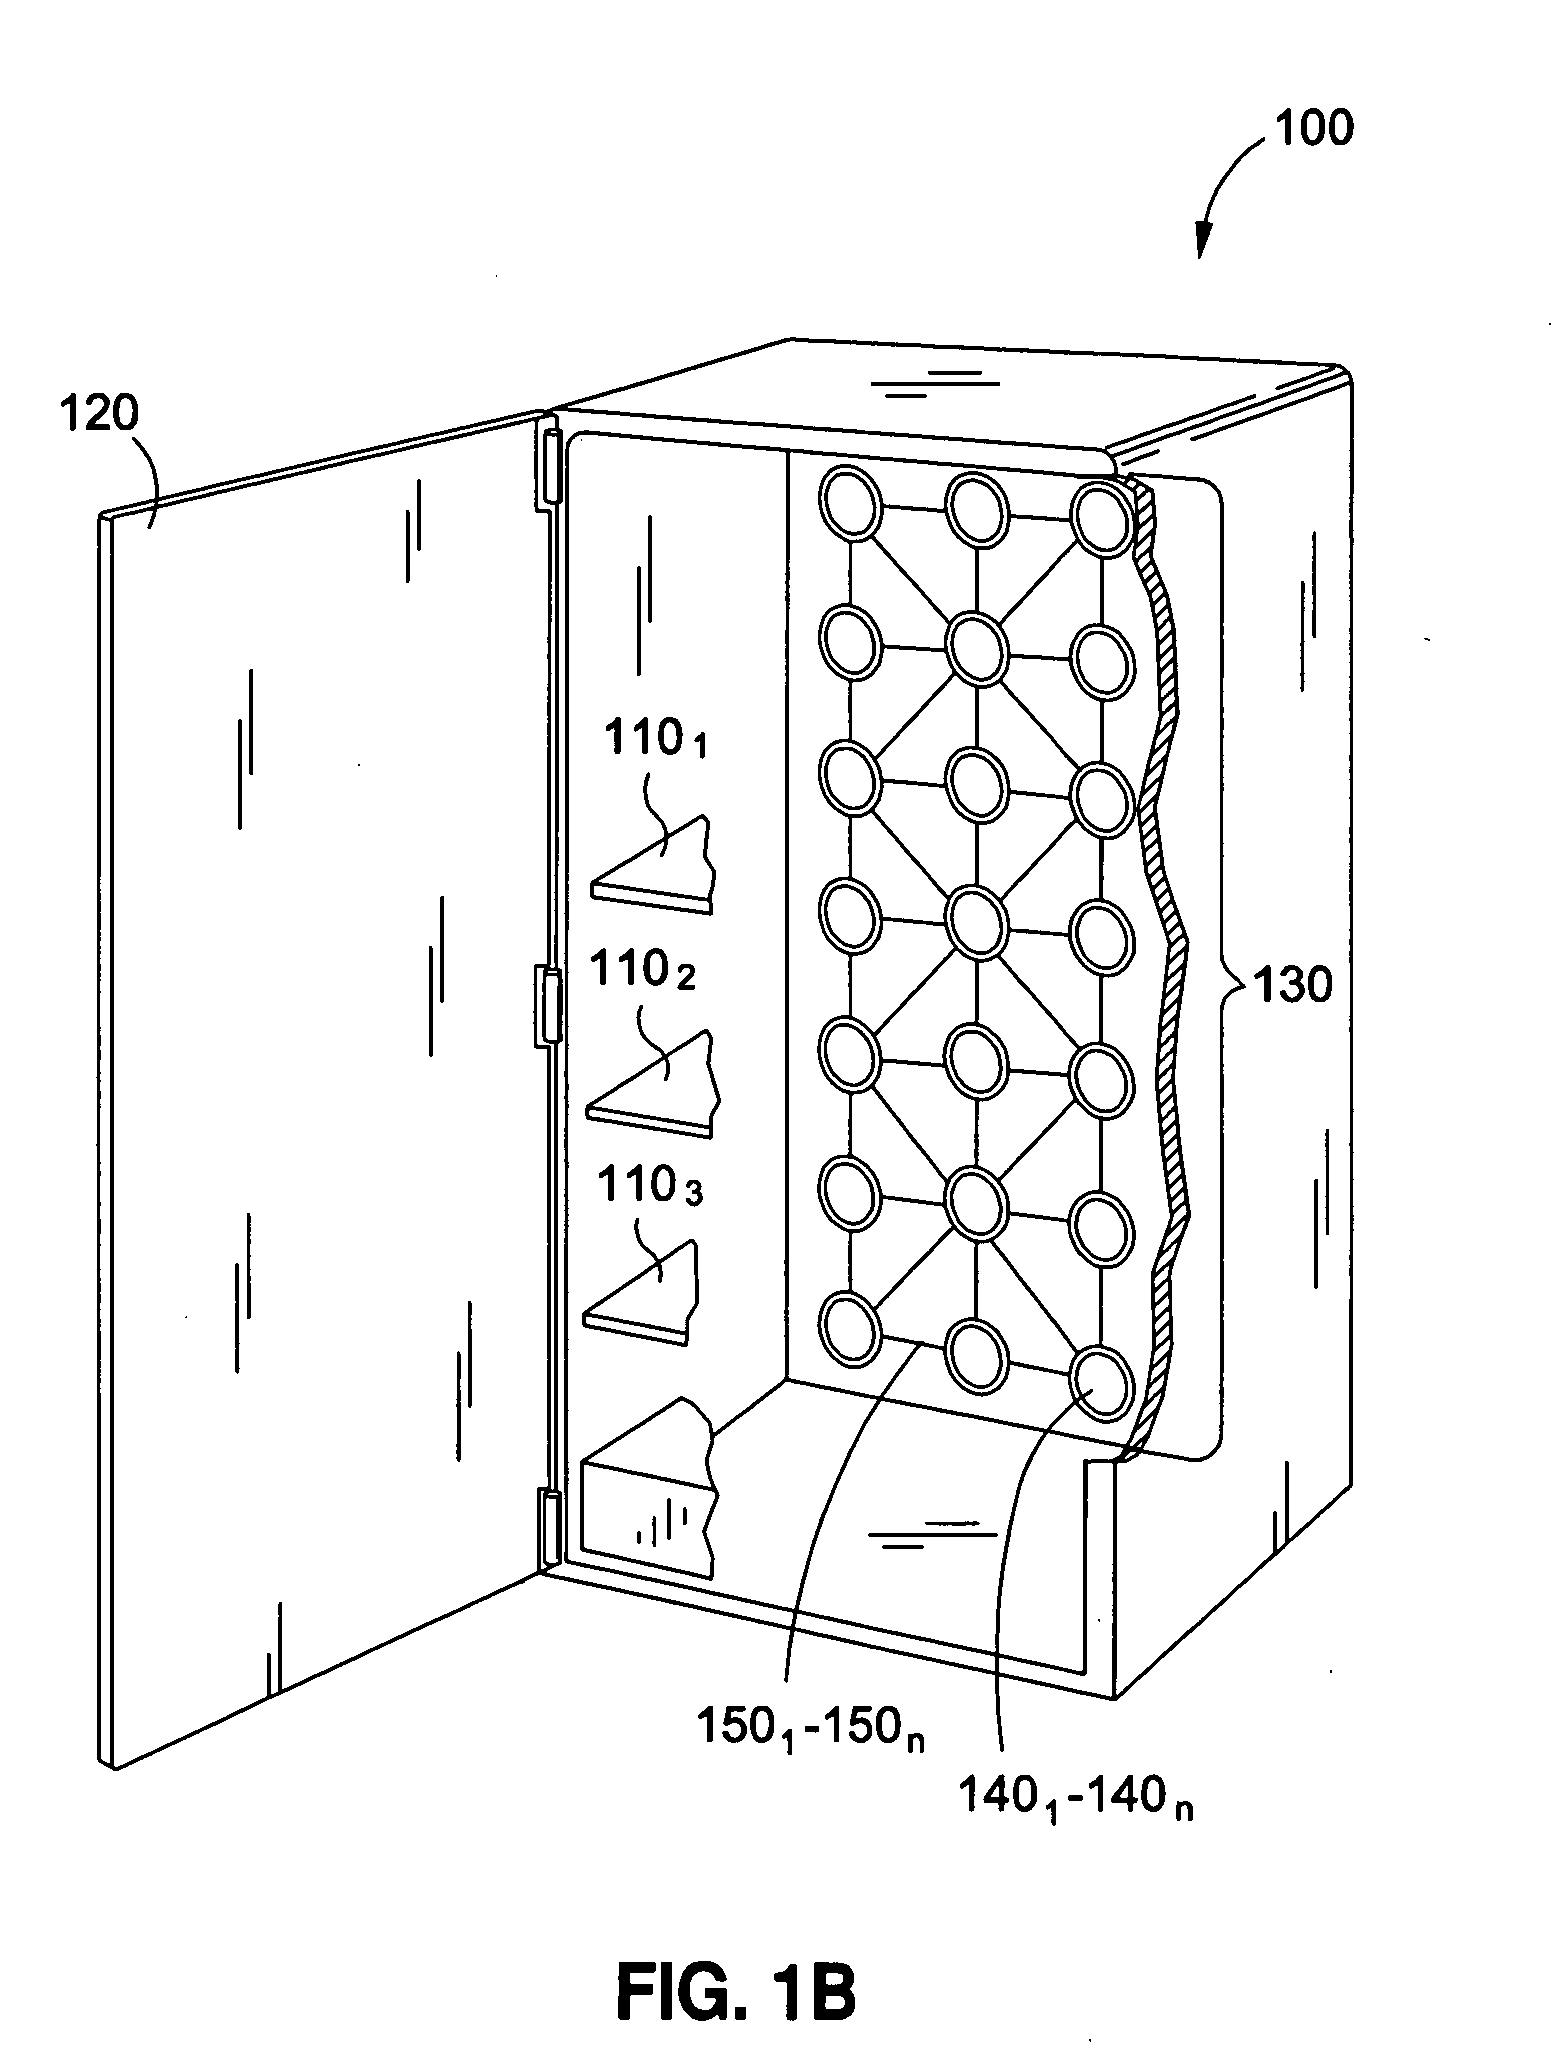 System and Method for Seamless Imaging of Appliance Interiors